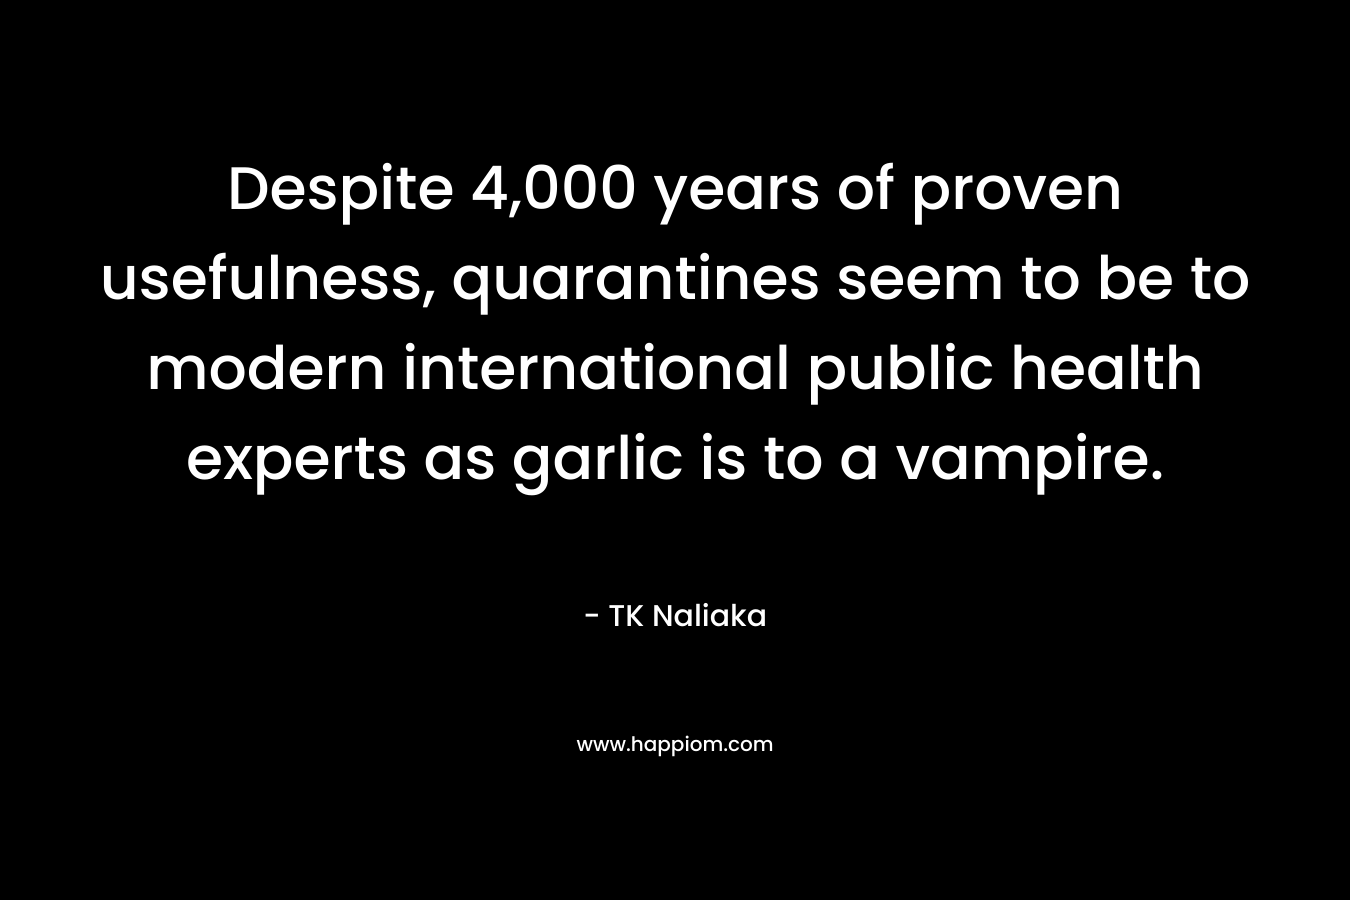 Despite 4,000 years of proven usefulness, quarantines seem to be to modern international public health experts as garlic is to a vampire.